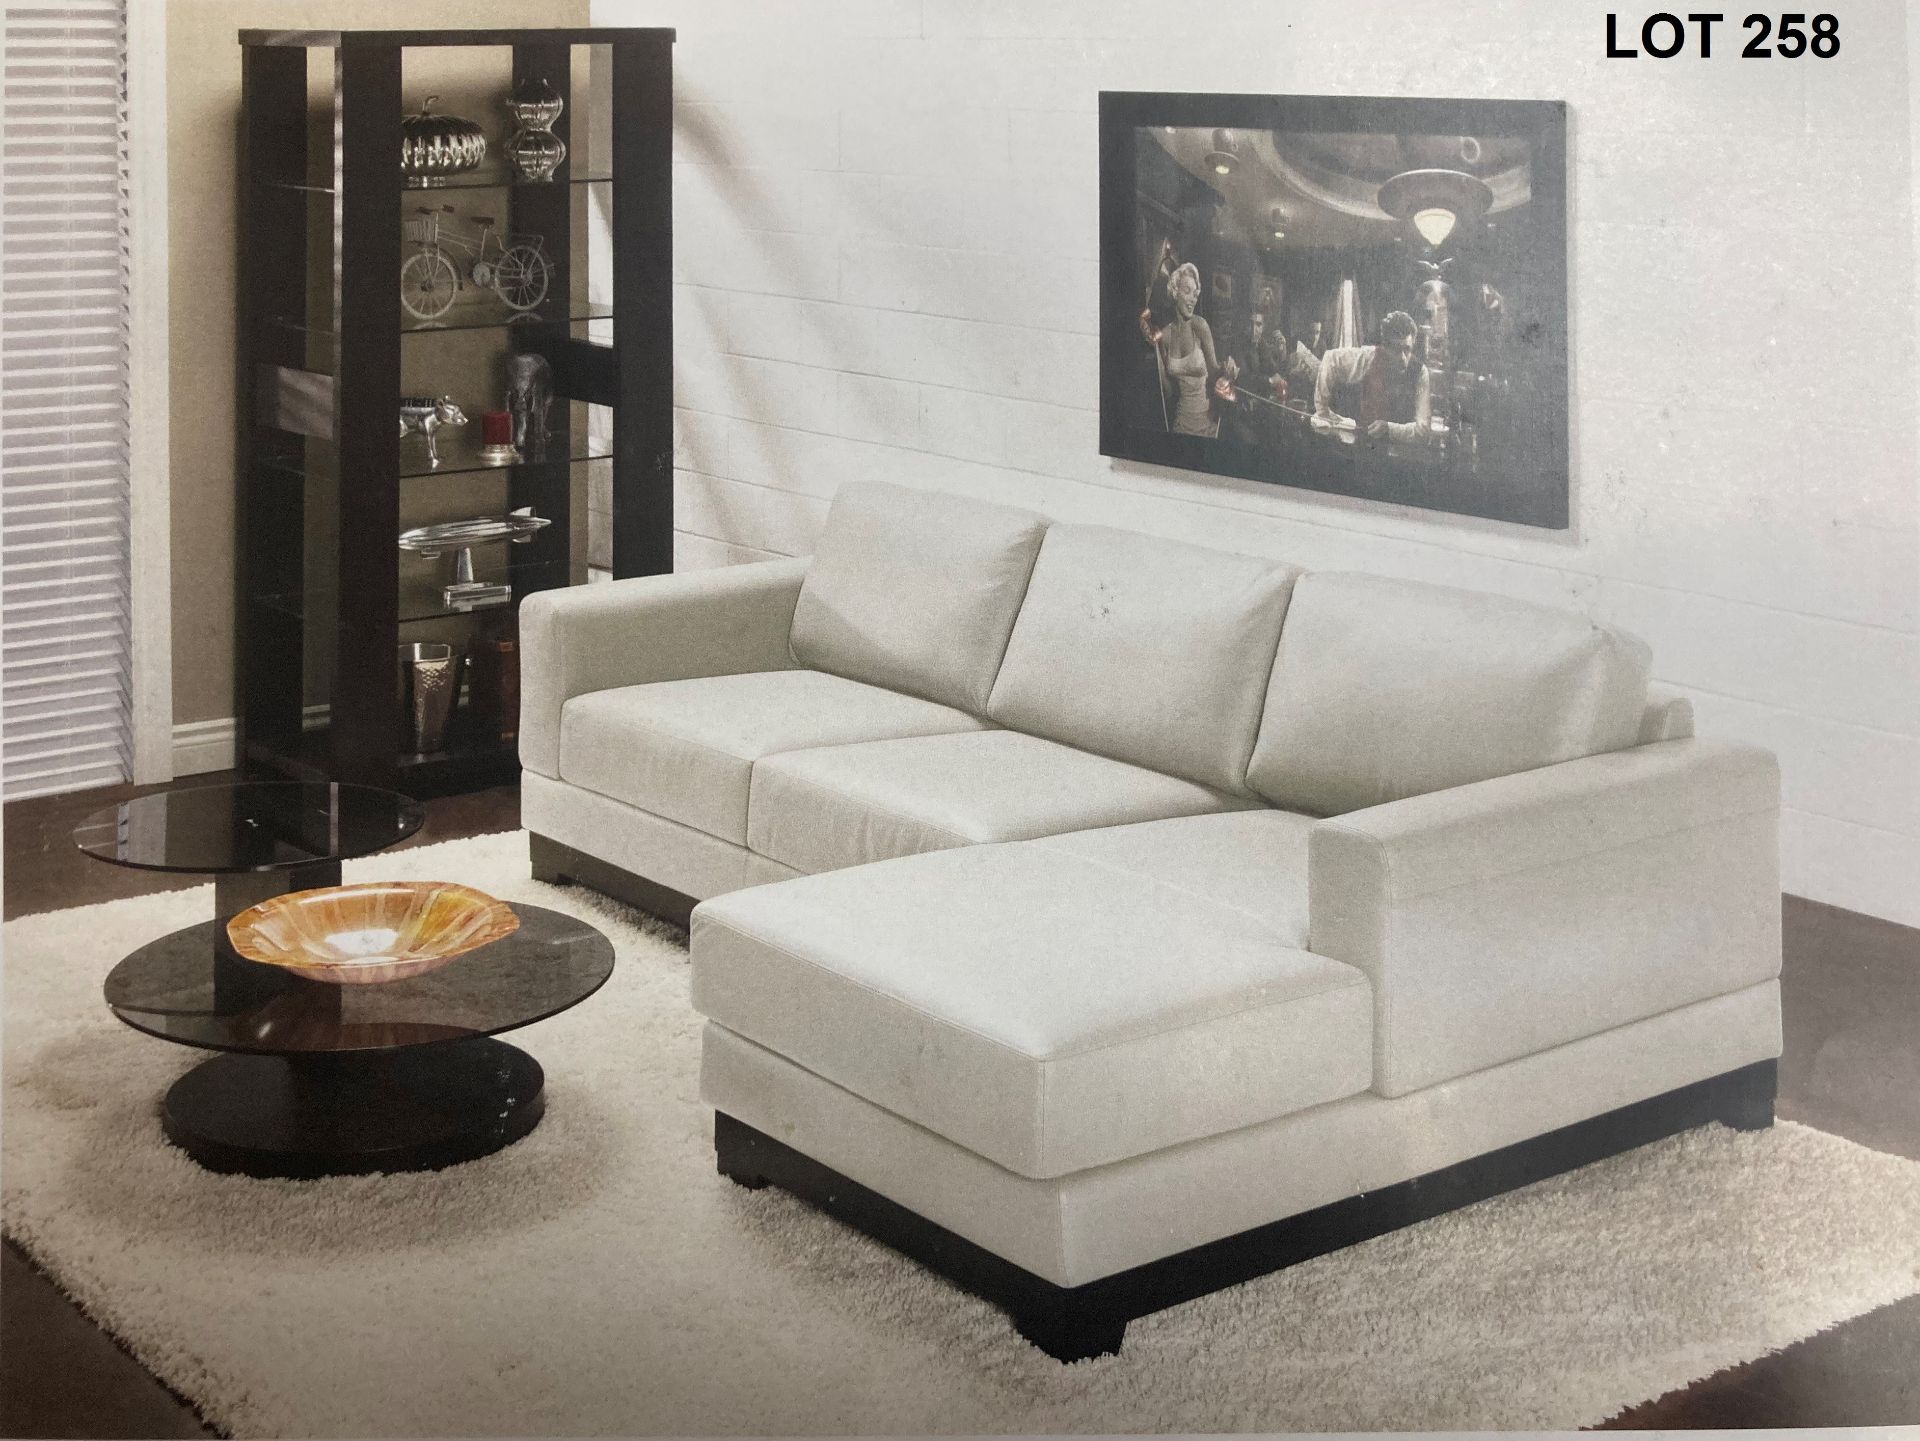 VENICE WHITE 100% GENUINE LEATHER SECTIONAL SOFA W/ CHAISE LOUNGER - 94" (#976) (CANADIAN MADE)